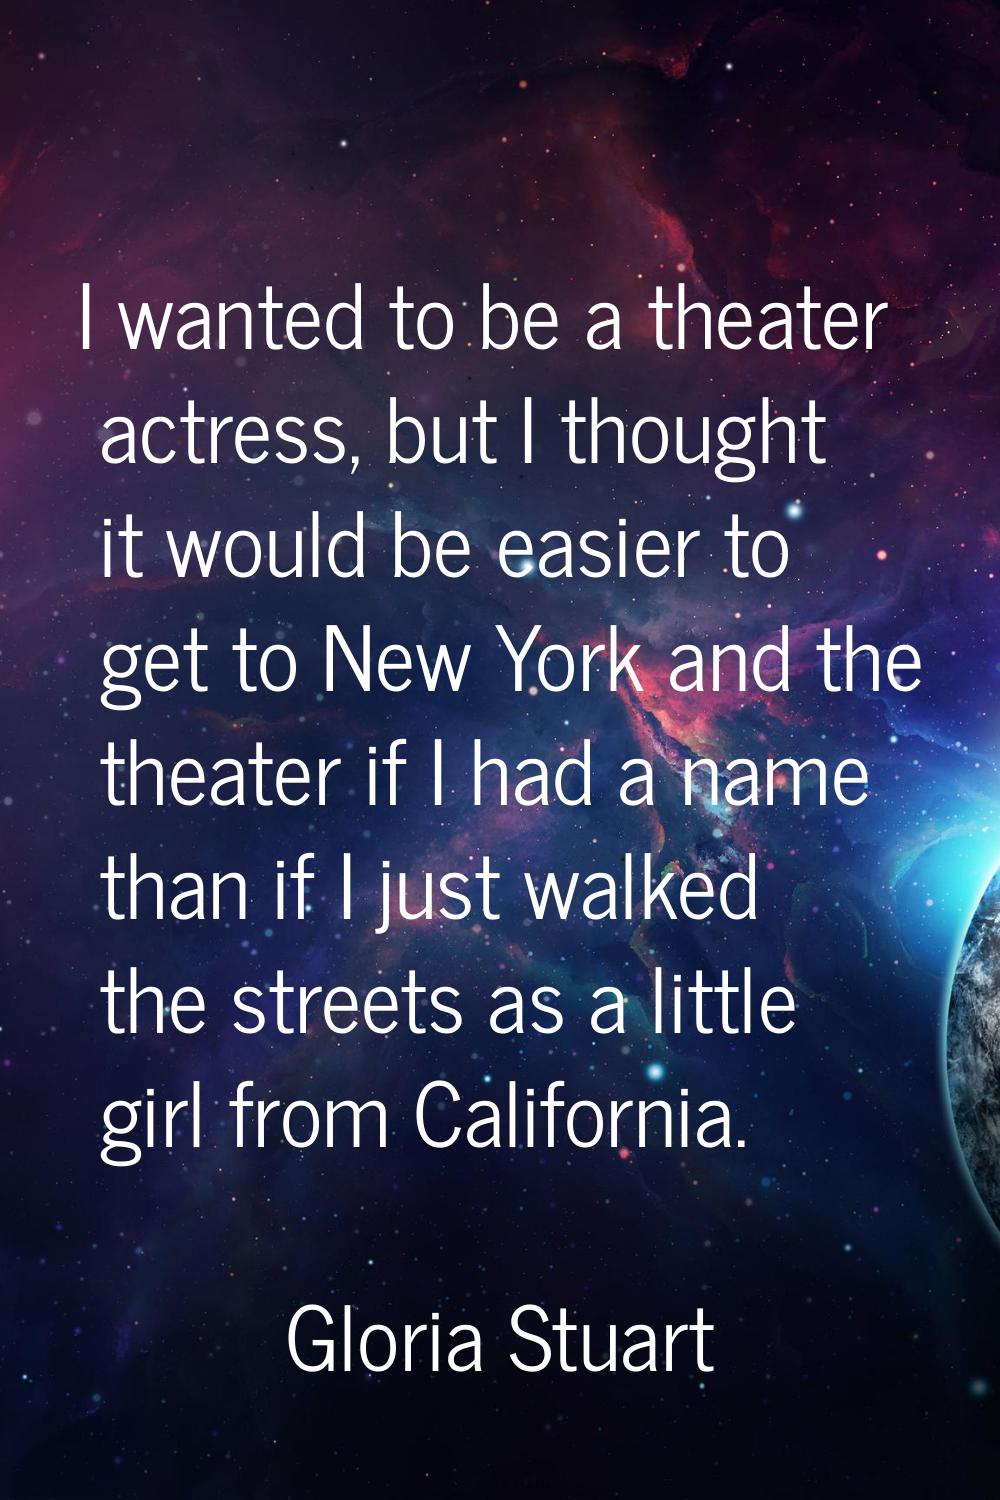 I wanted to be a theater actress, but I thought it would be easier to get to New York and the theat